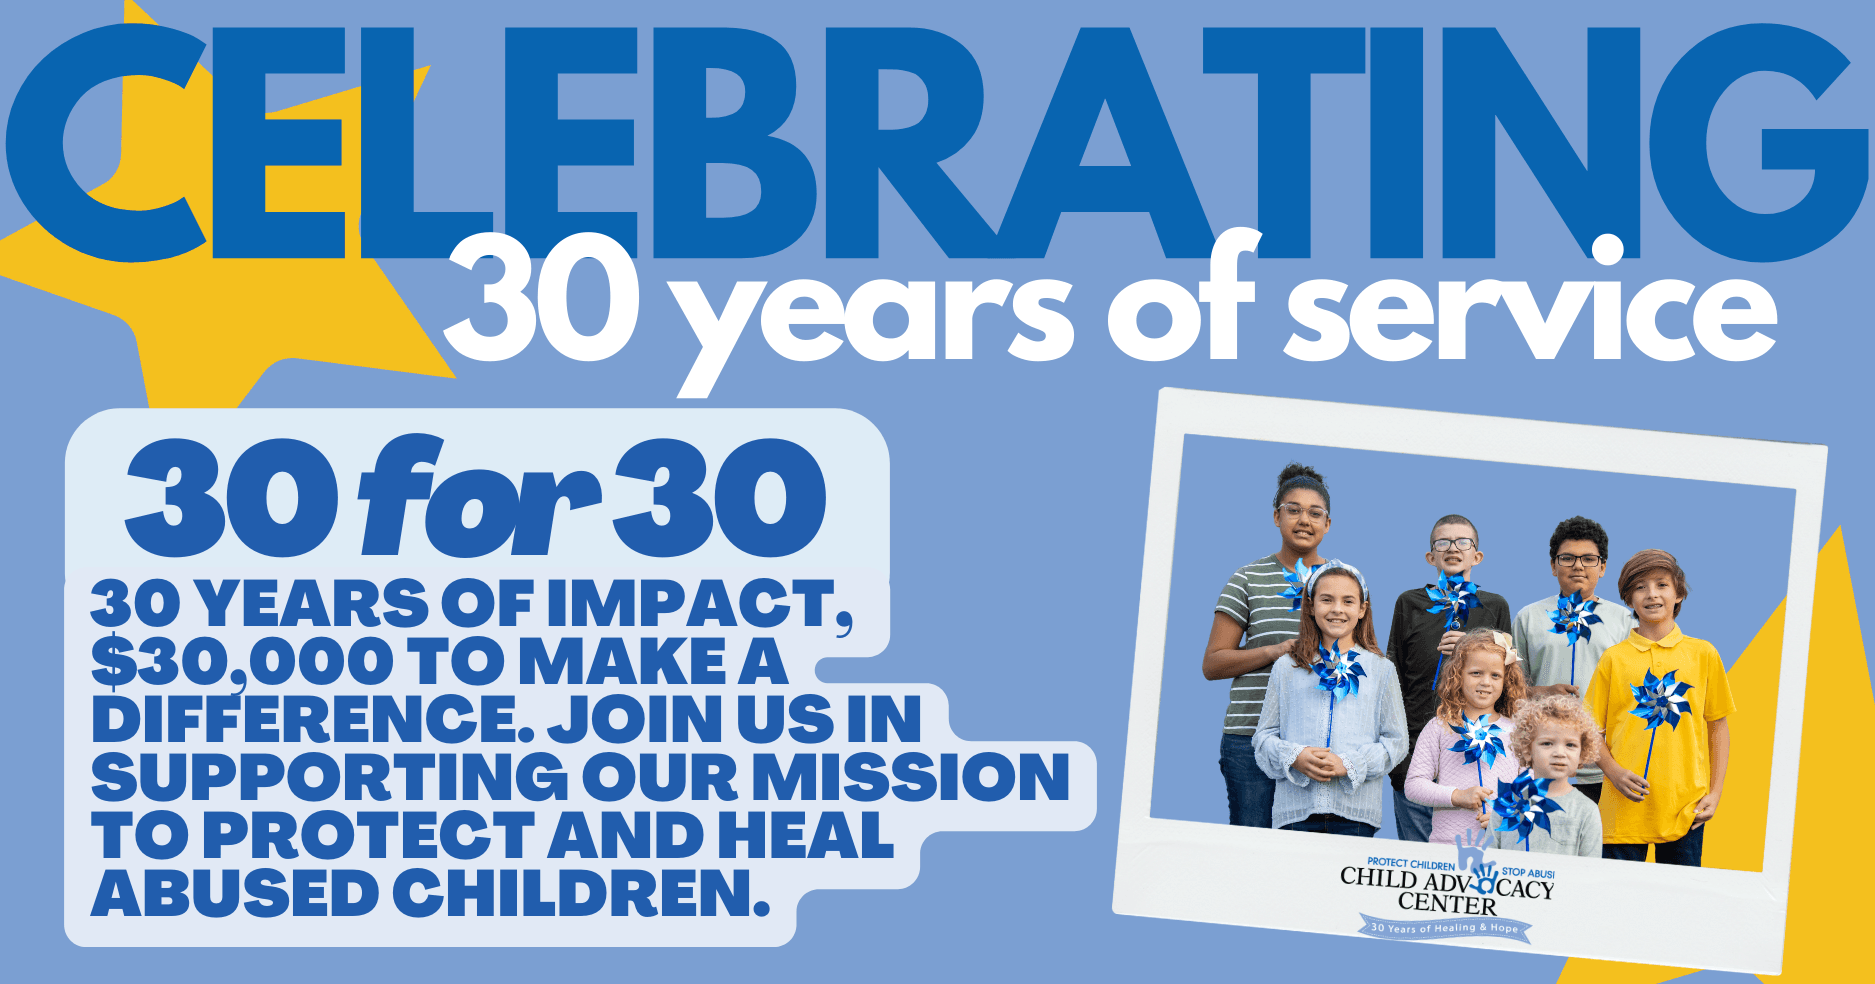 It’s “30 for 30” time at the Child advocacy Center.  Here’s why!!